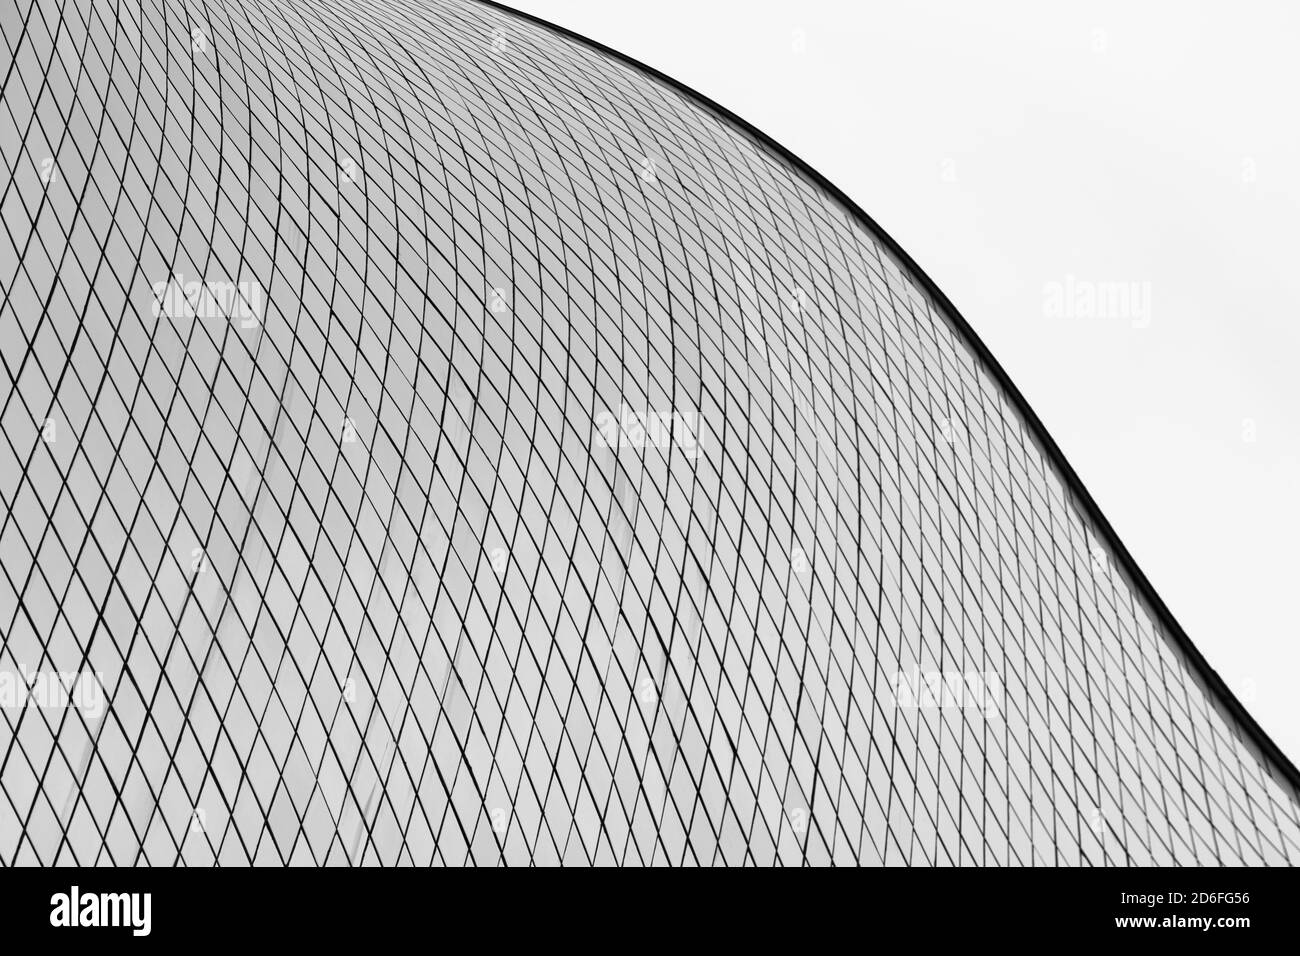 curve line of black and white architecture design mesh wall background Stock Photo